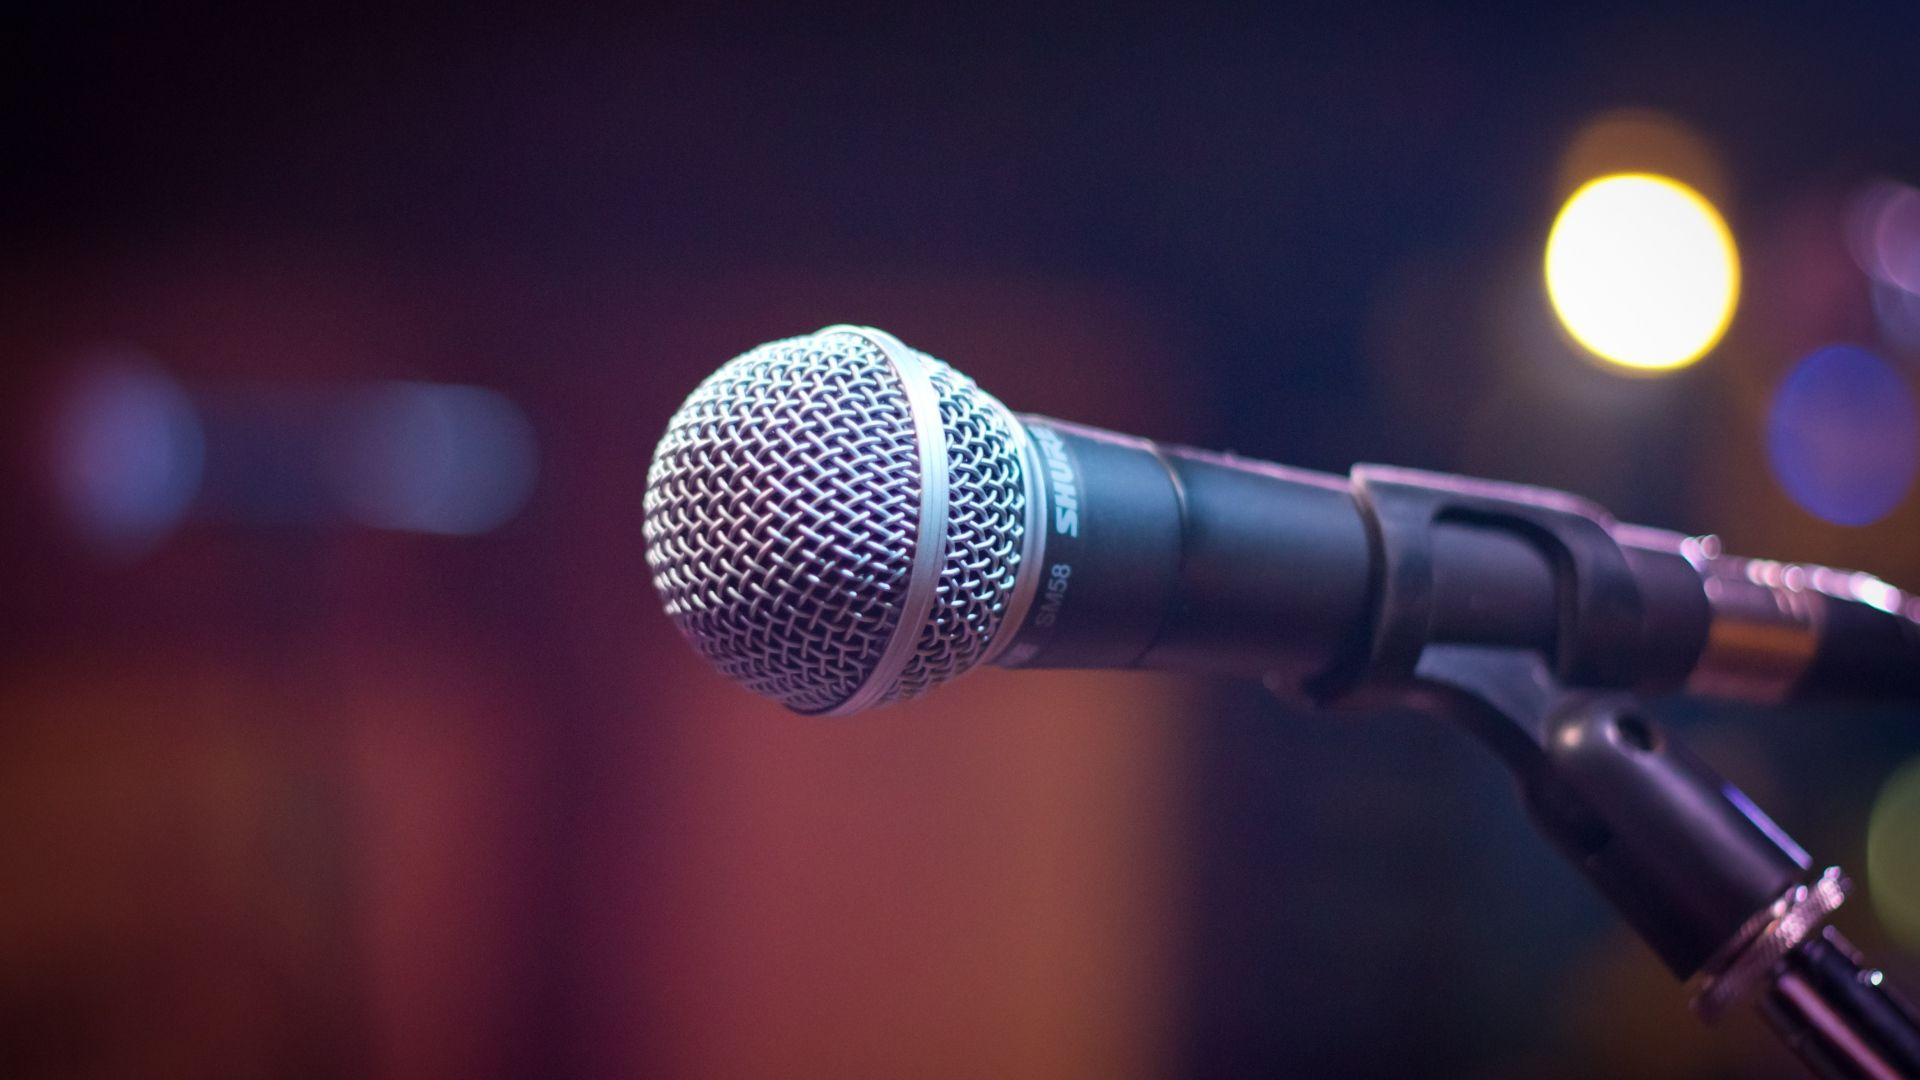 Microphone Wallpapers Wallpaper Cave